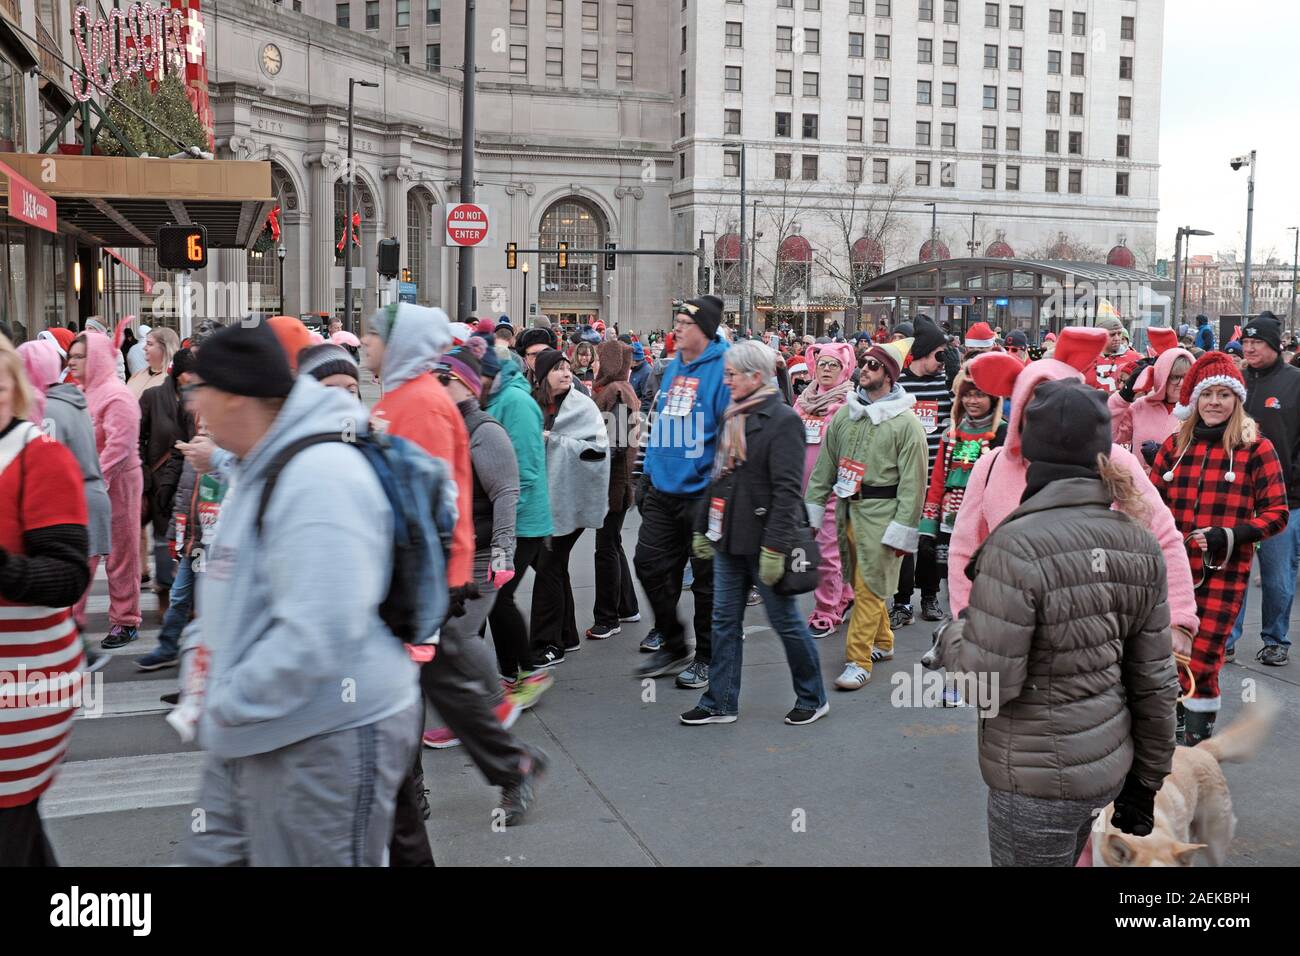 Participants in the 2019 Christmas Story Run fill Public Square in downtown Cleveland, Ohio, USA prior to the annual holiday run. Stock Photo